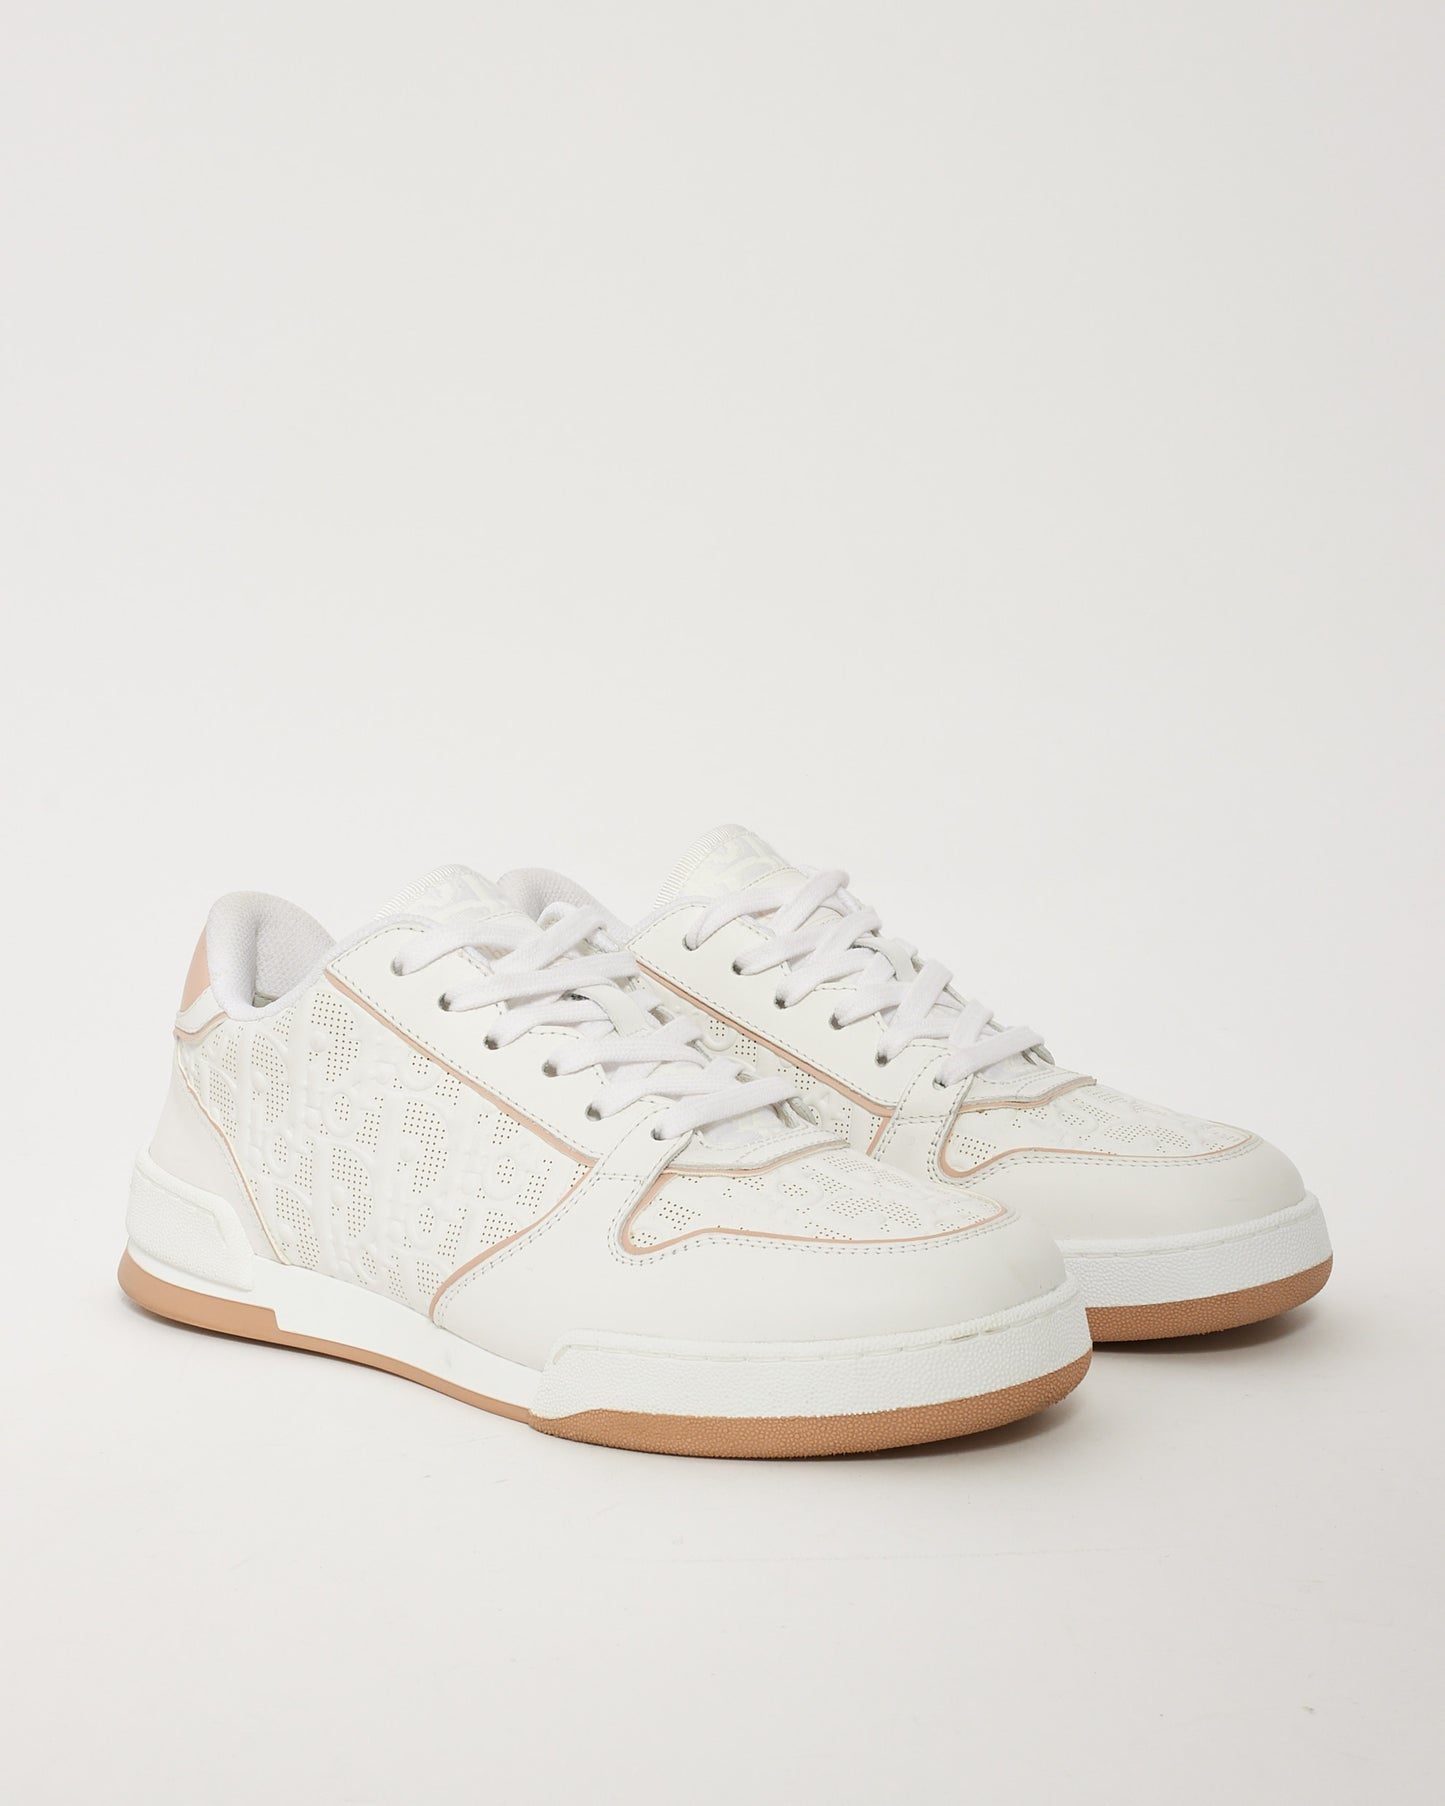 Dior White Dior Oblique Perforated Calfskin One Sneaker - 36.5